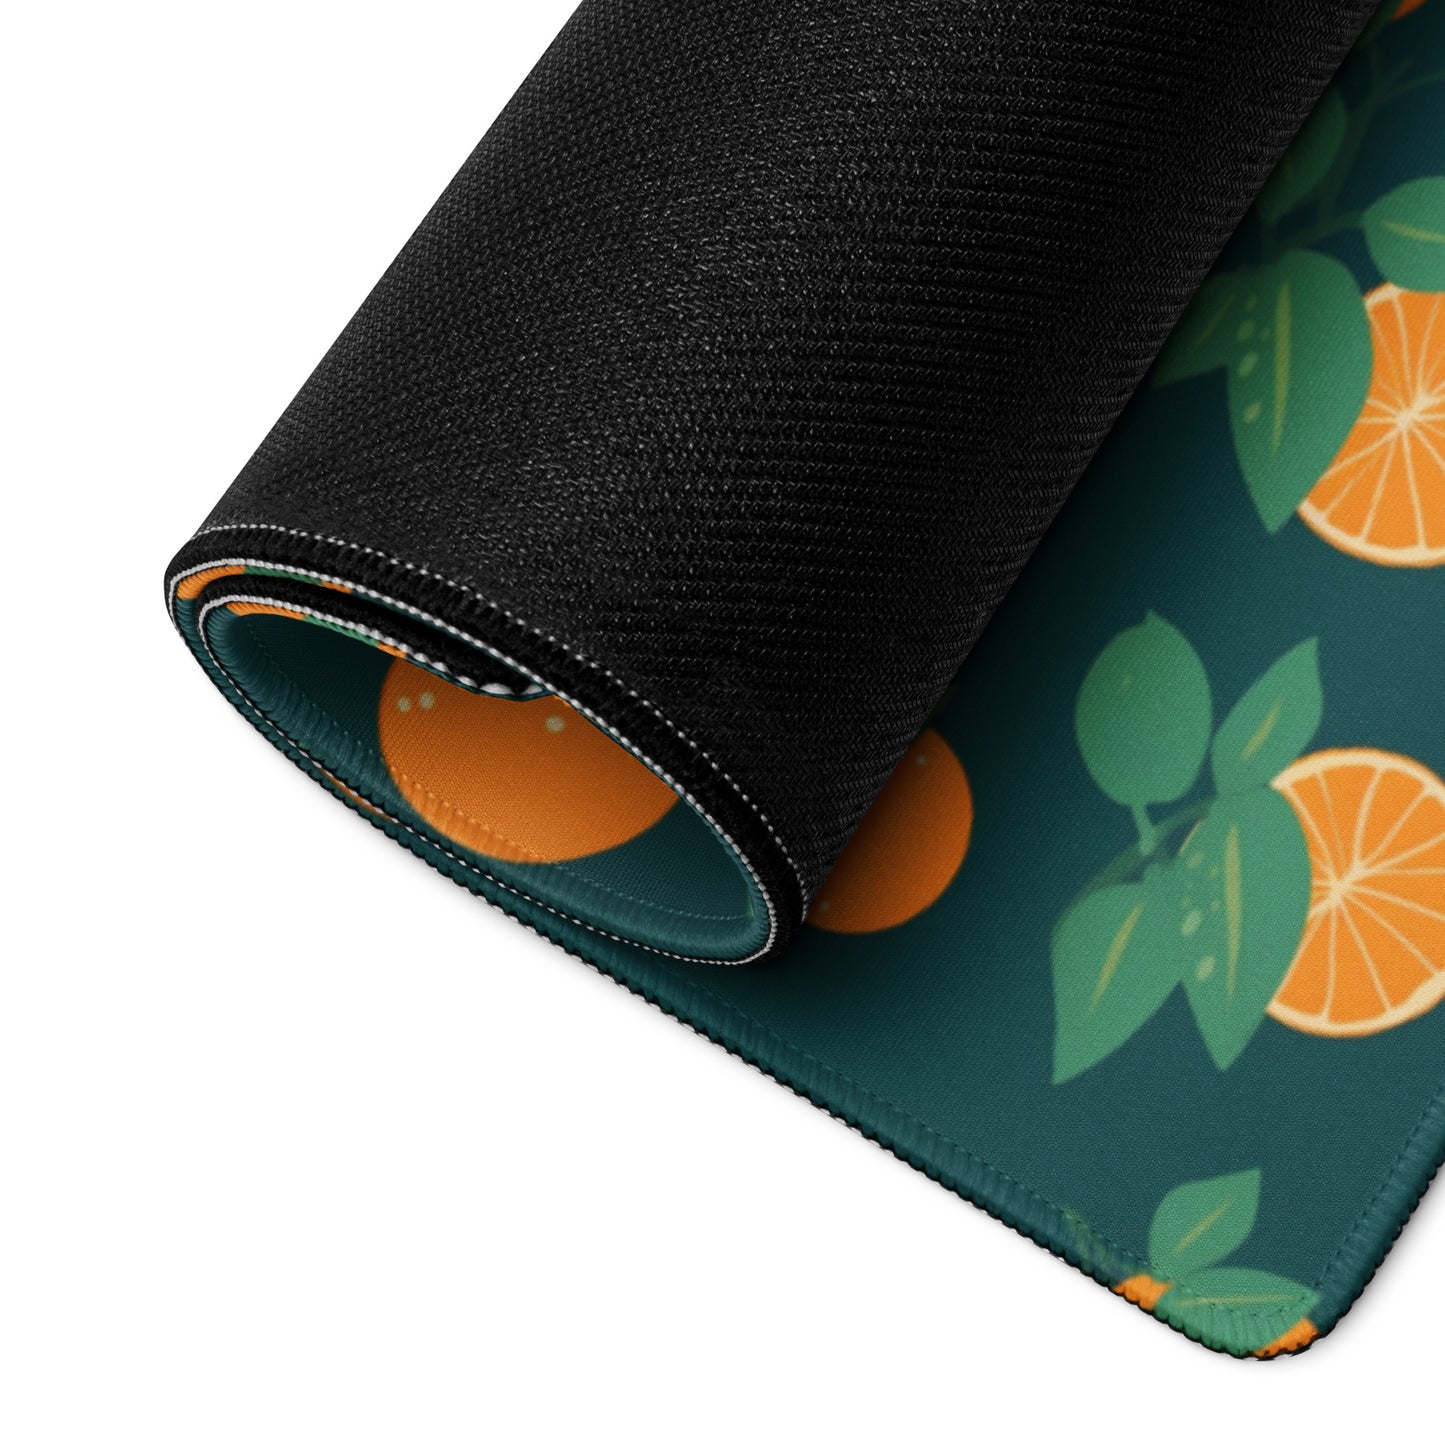 A 36" x 18" desk pad with oranges all over it rolled up. Orange and Blue in color.